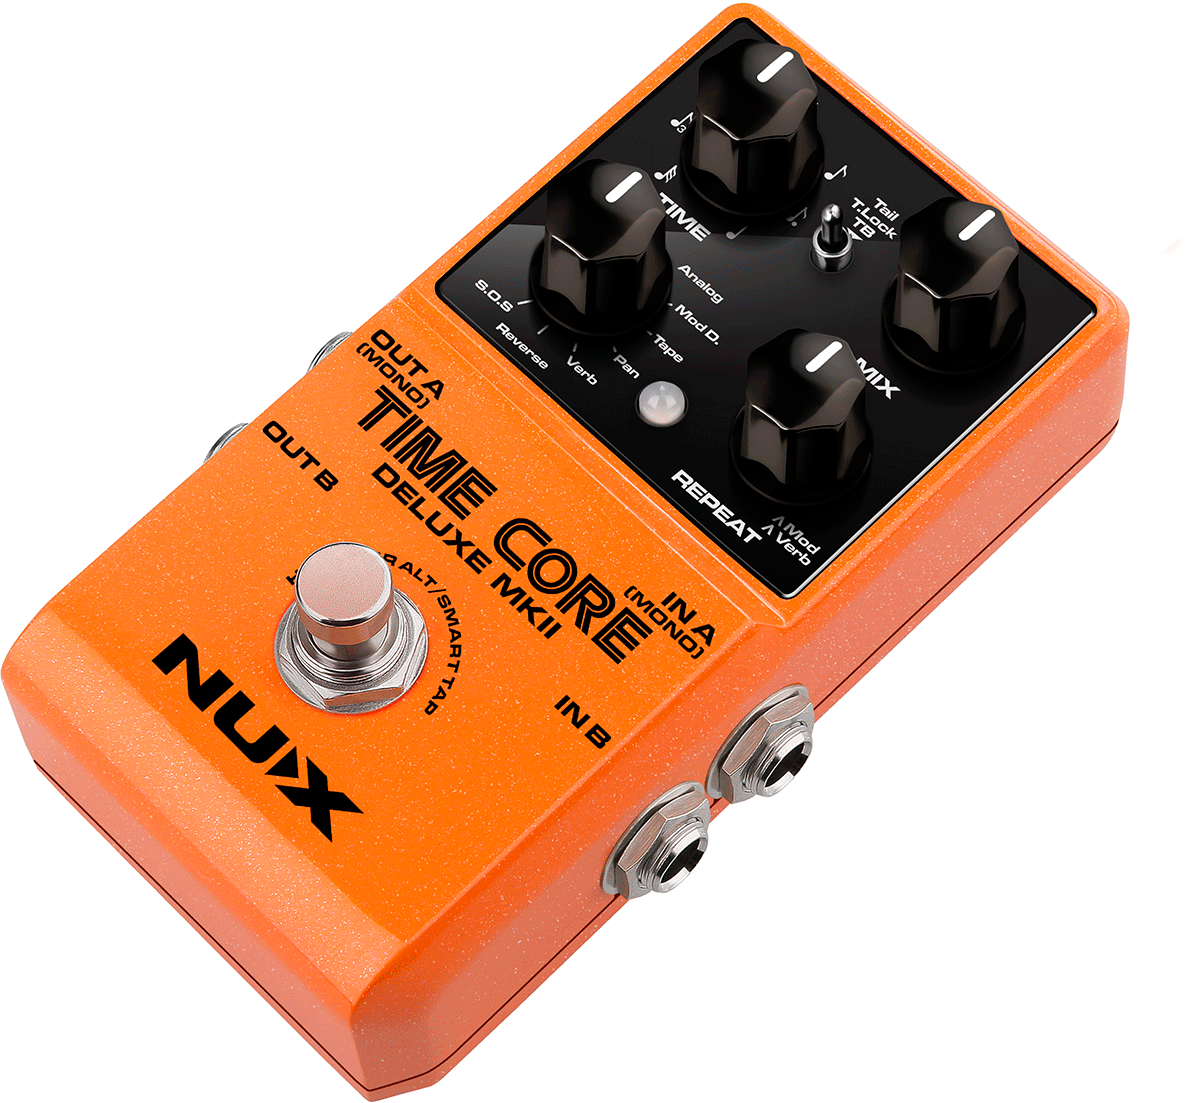 Nux Time Core Deluxe Mk2 - Reverb, delay & echo effect pedal - Variation 1